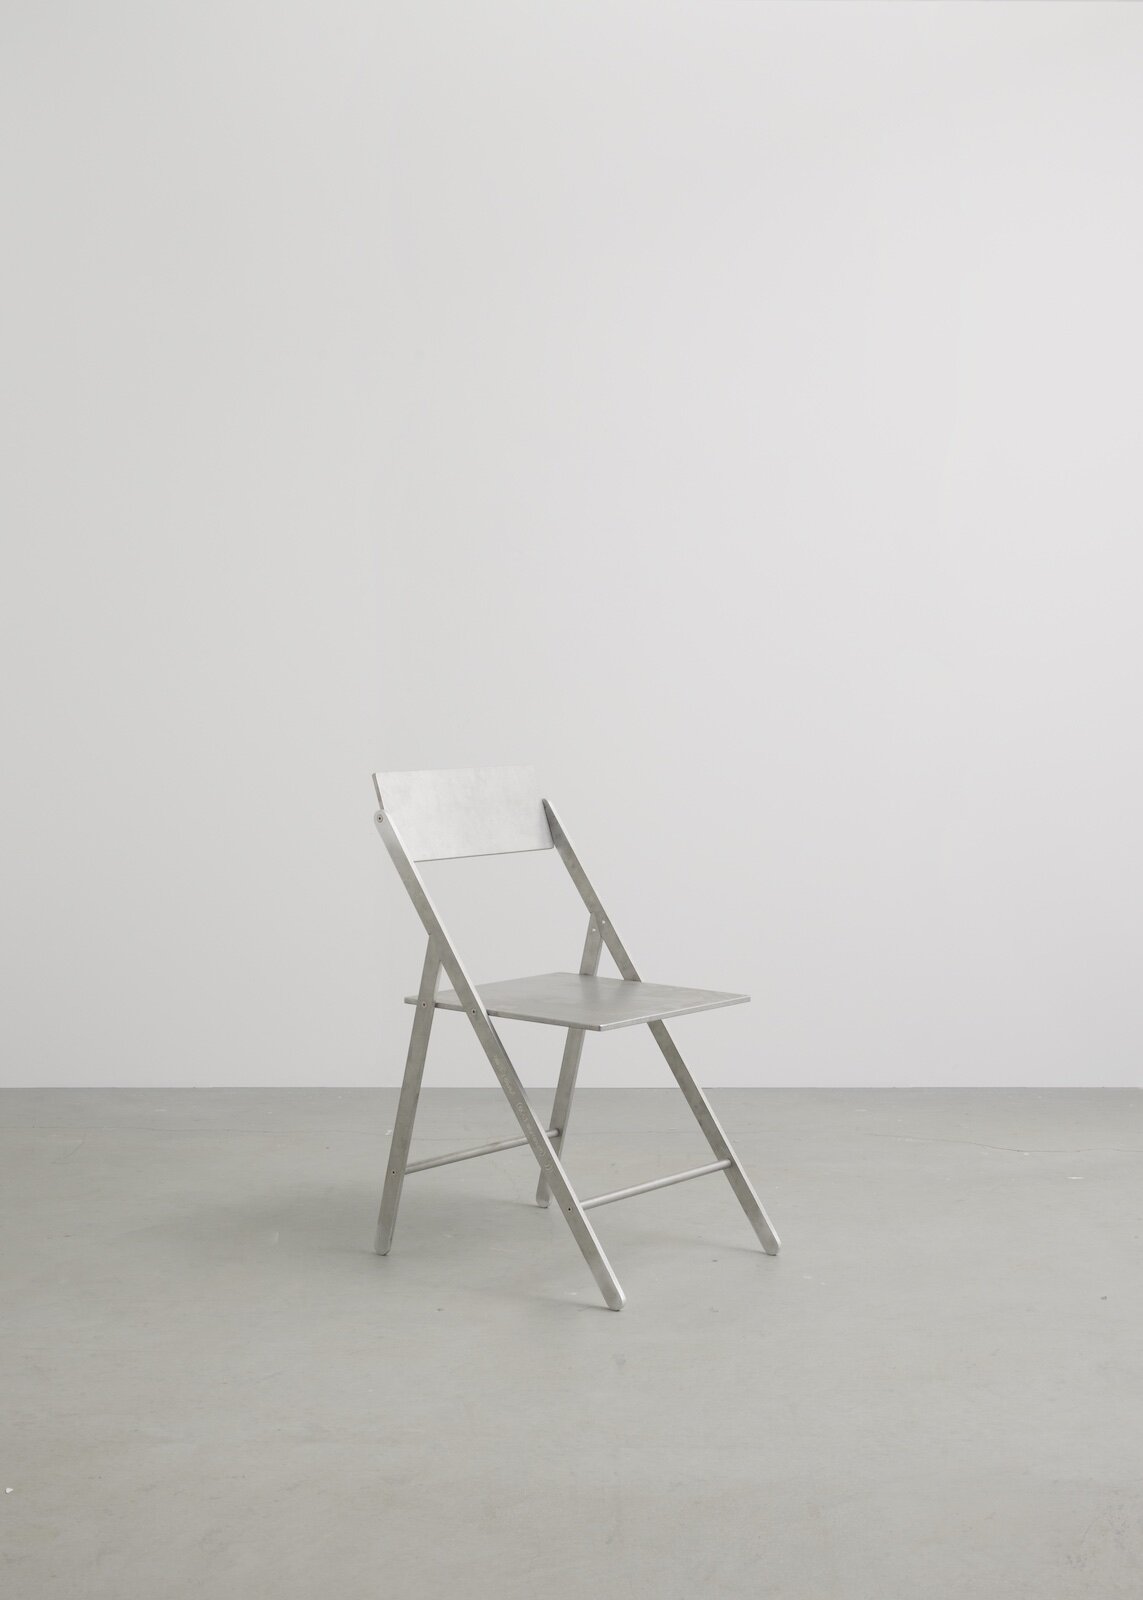 Folding chair, made by Black Helmut